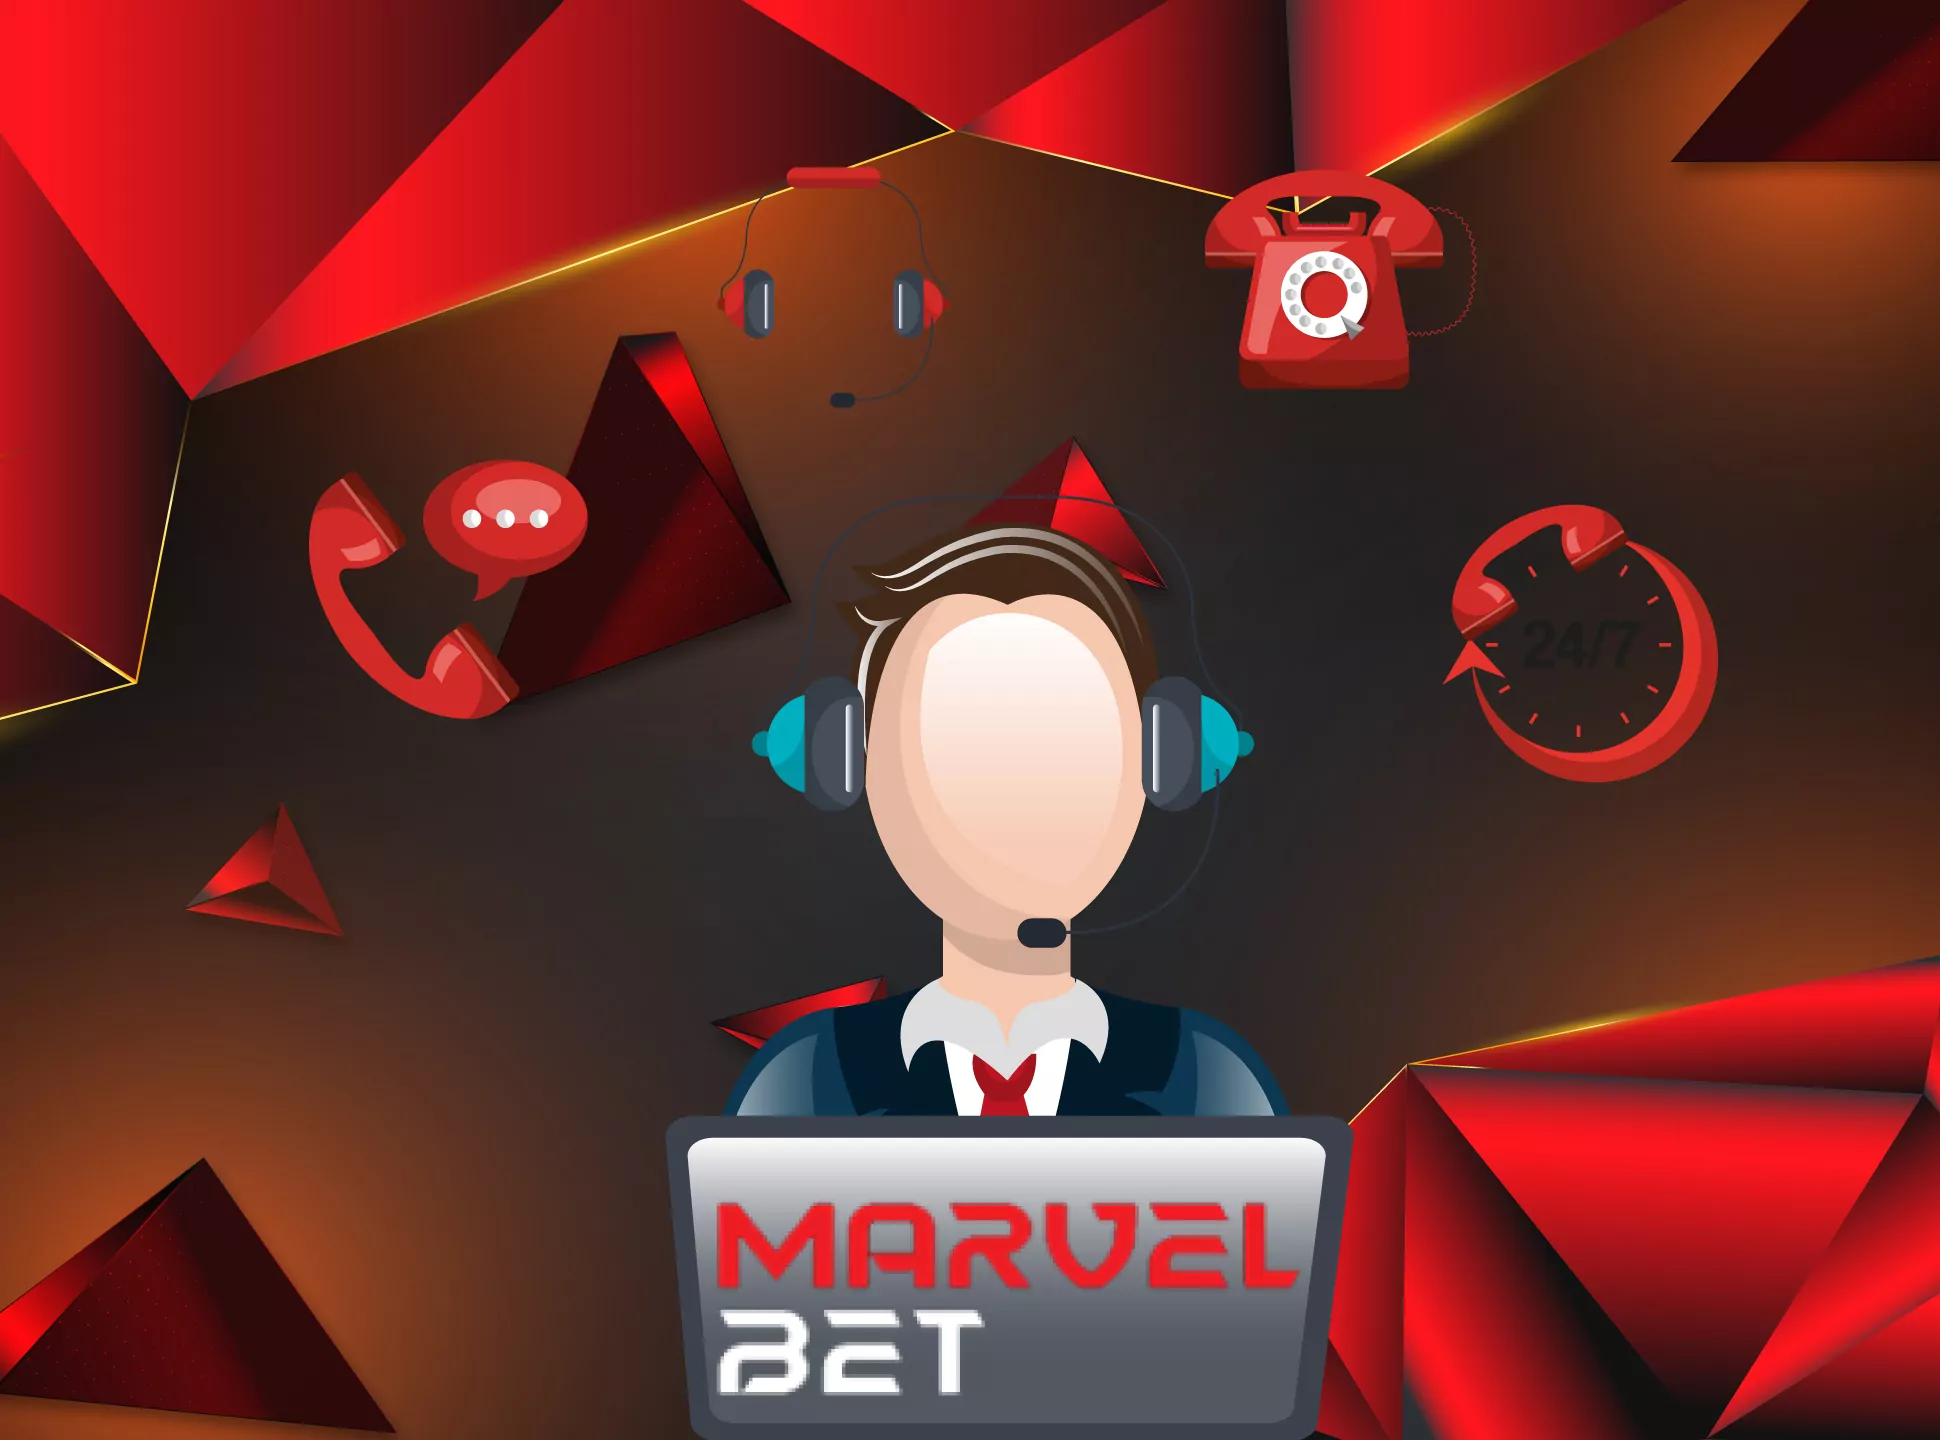 Contact the MarvelBet support team if you have any problems.